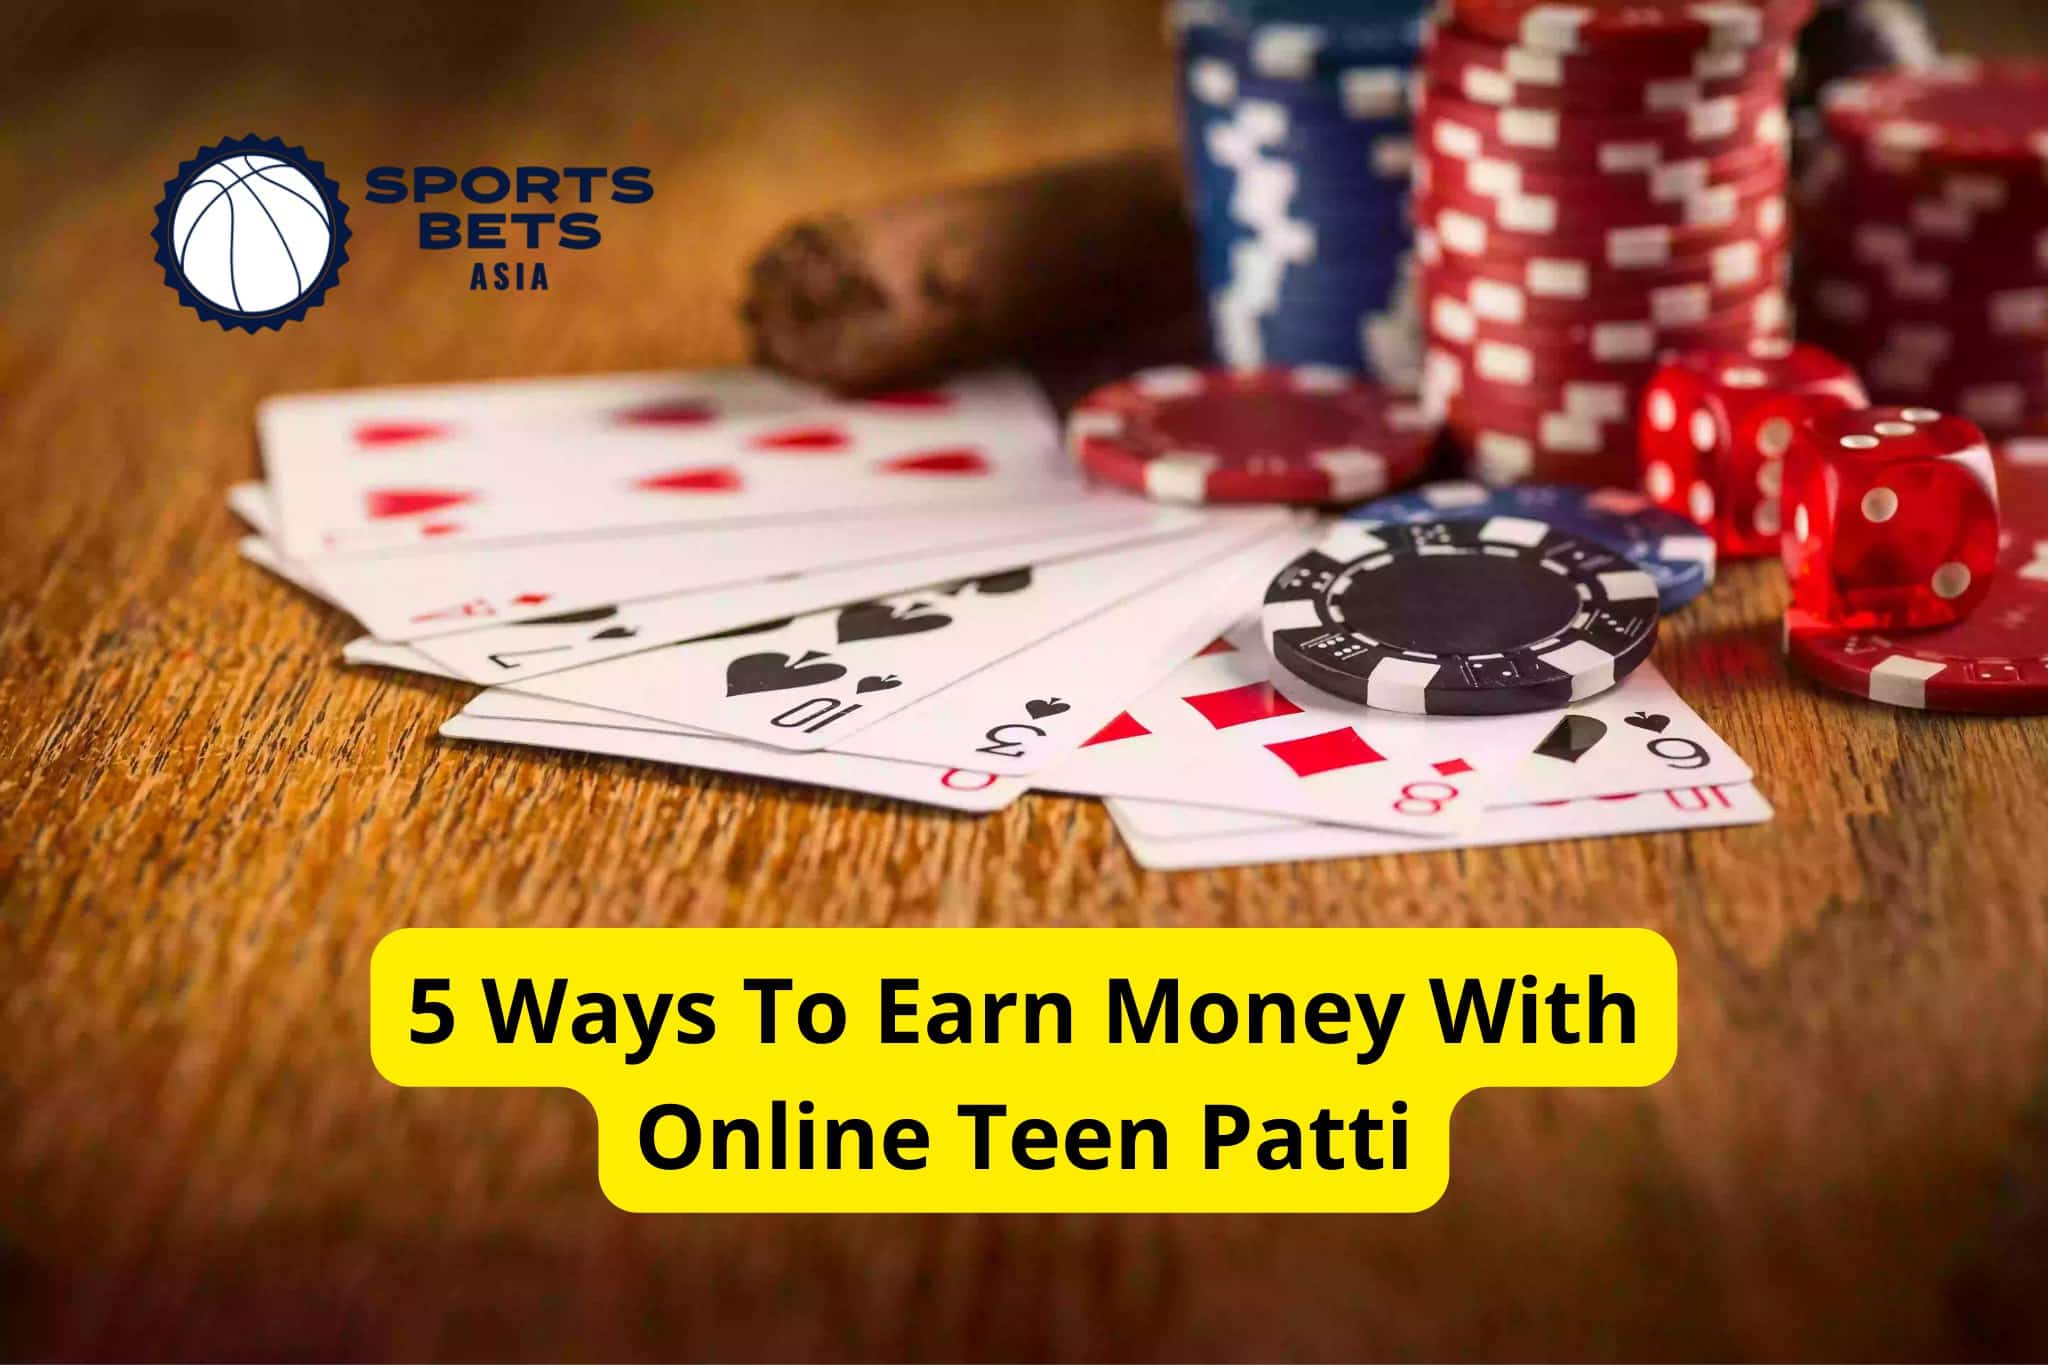 5 Ways To Earn Money With Online Teen Patti